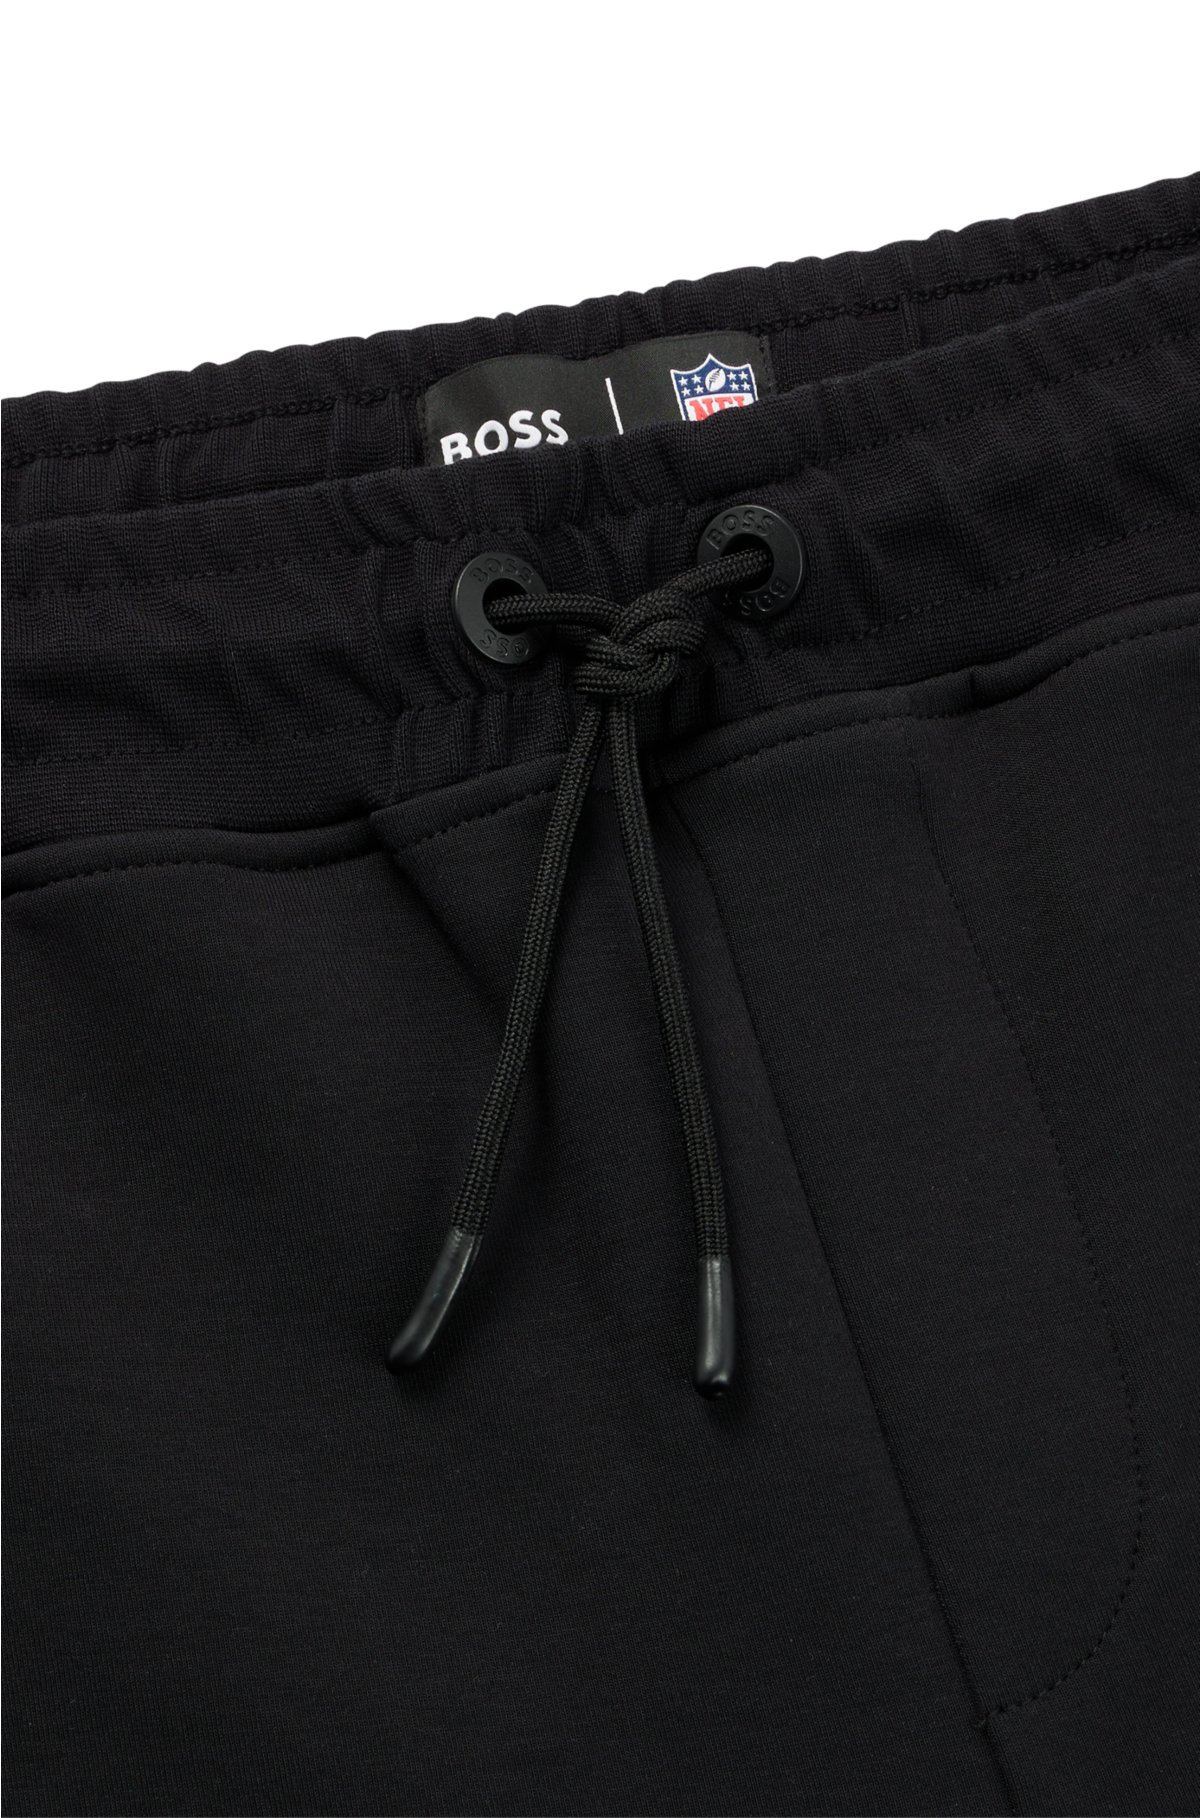 BOSS x NFL cotton-blend tracksuit bottoms with collaborative branding, Eagles